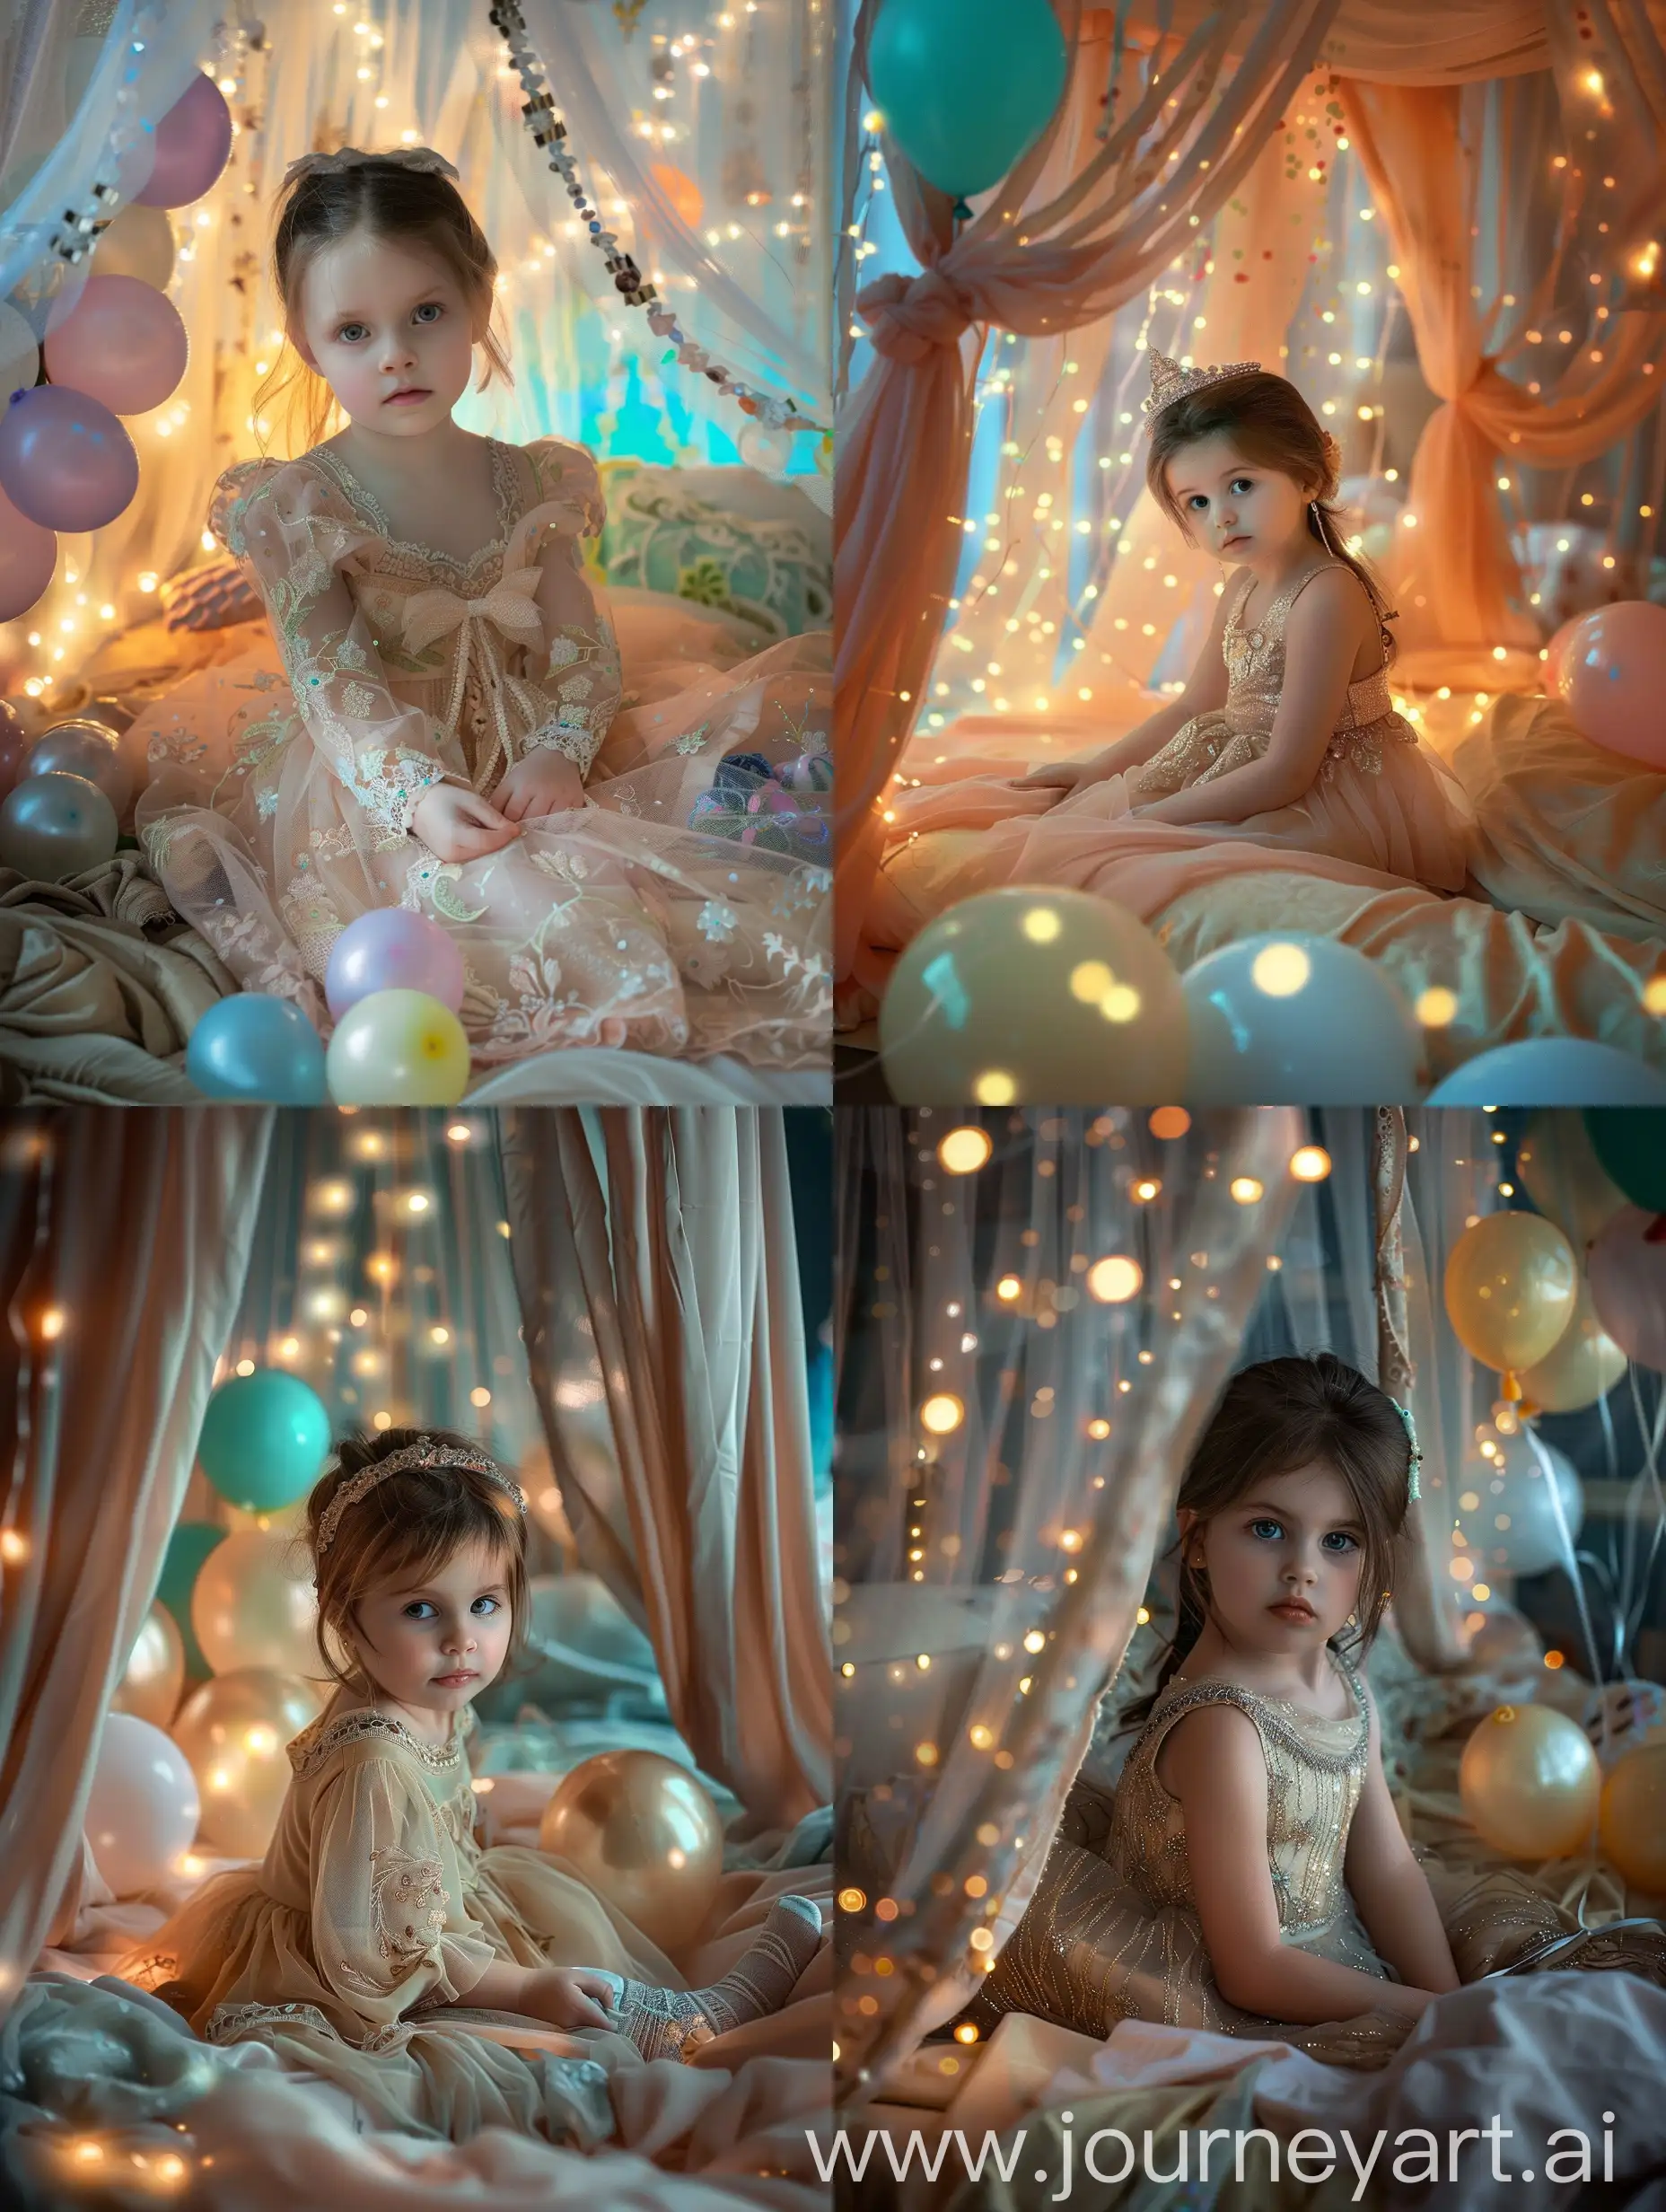 A little girl in a beautiful dress sitting on a bed with a canopy, the canopy glows with lights, balloons on the bed, close-up, realistic photo, hyperrealism, the face is clearly visible, looking at the camera, bed colors, close up photo, light photo